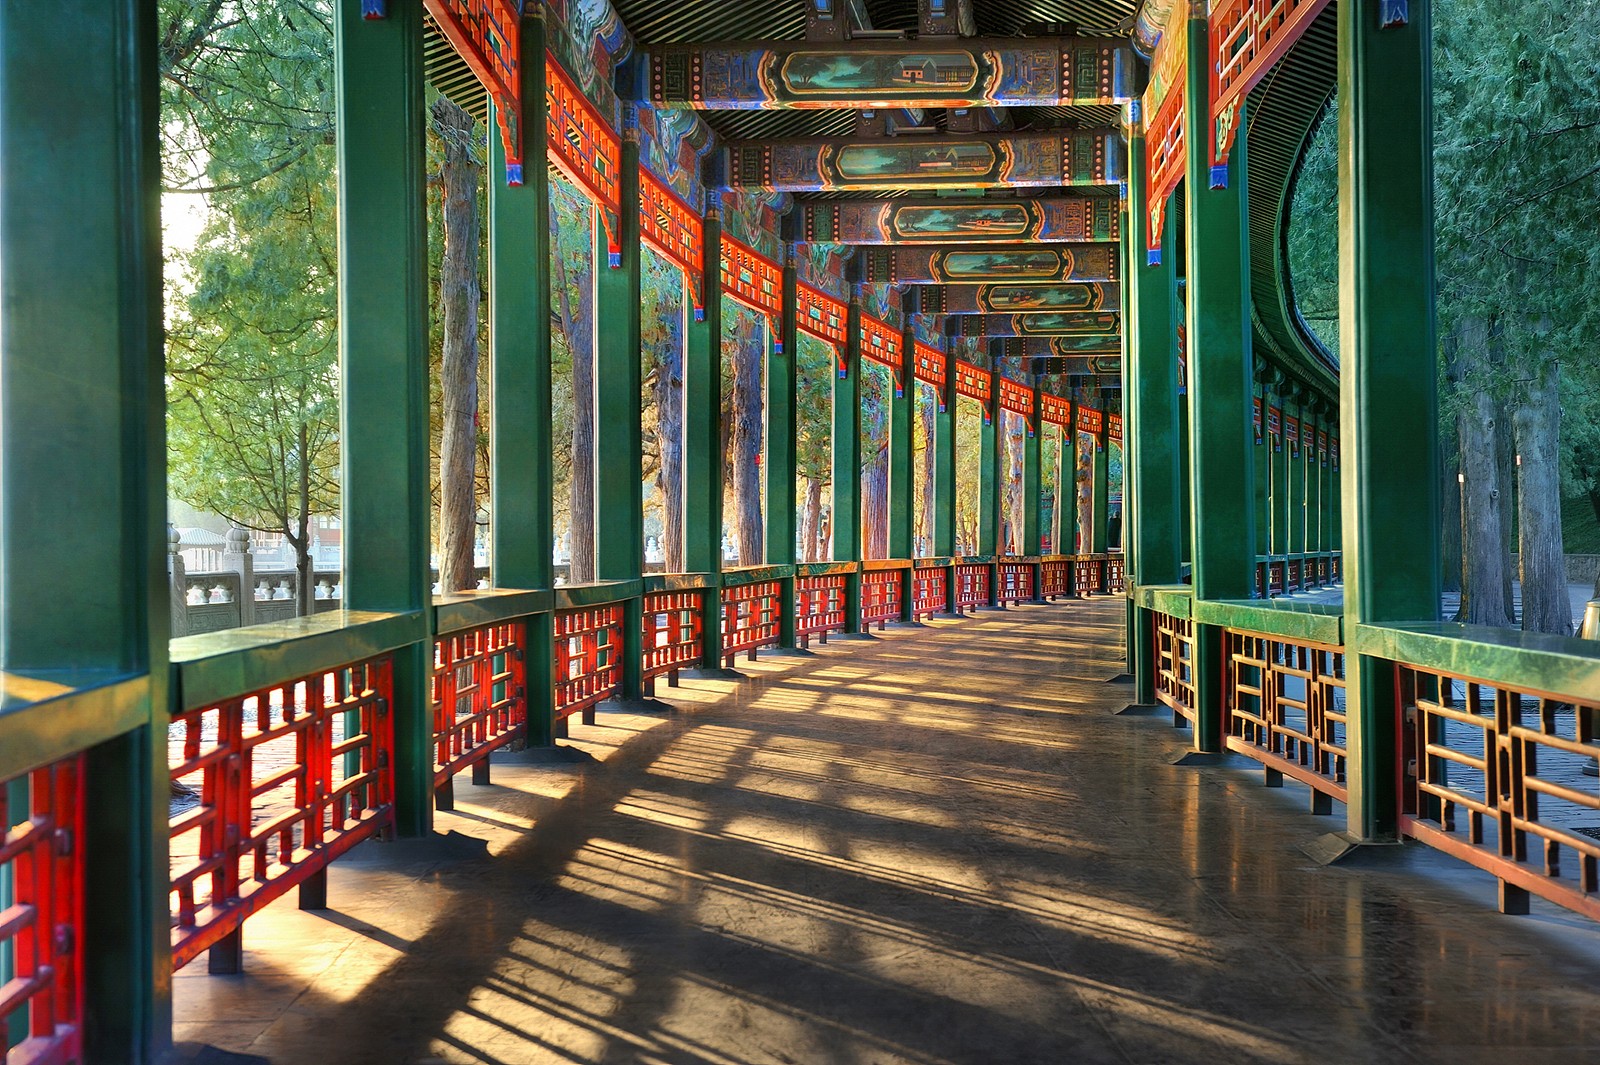 Green paint adorns the woodwork in a corridor at the Summer Palace in Beijing. /CFP